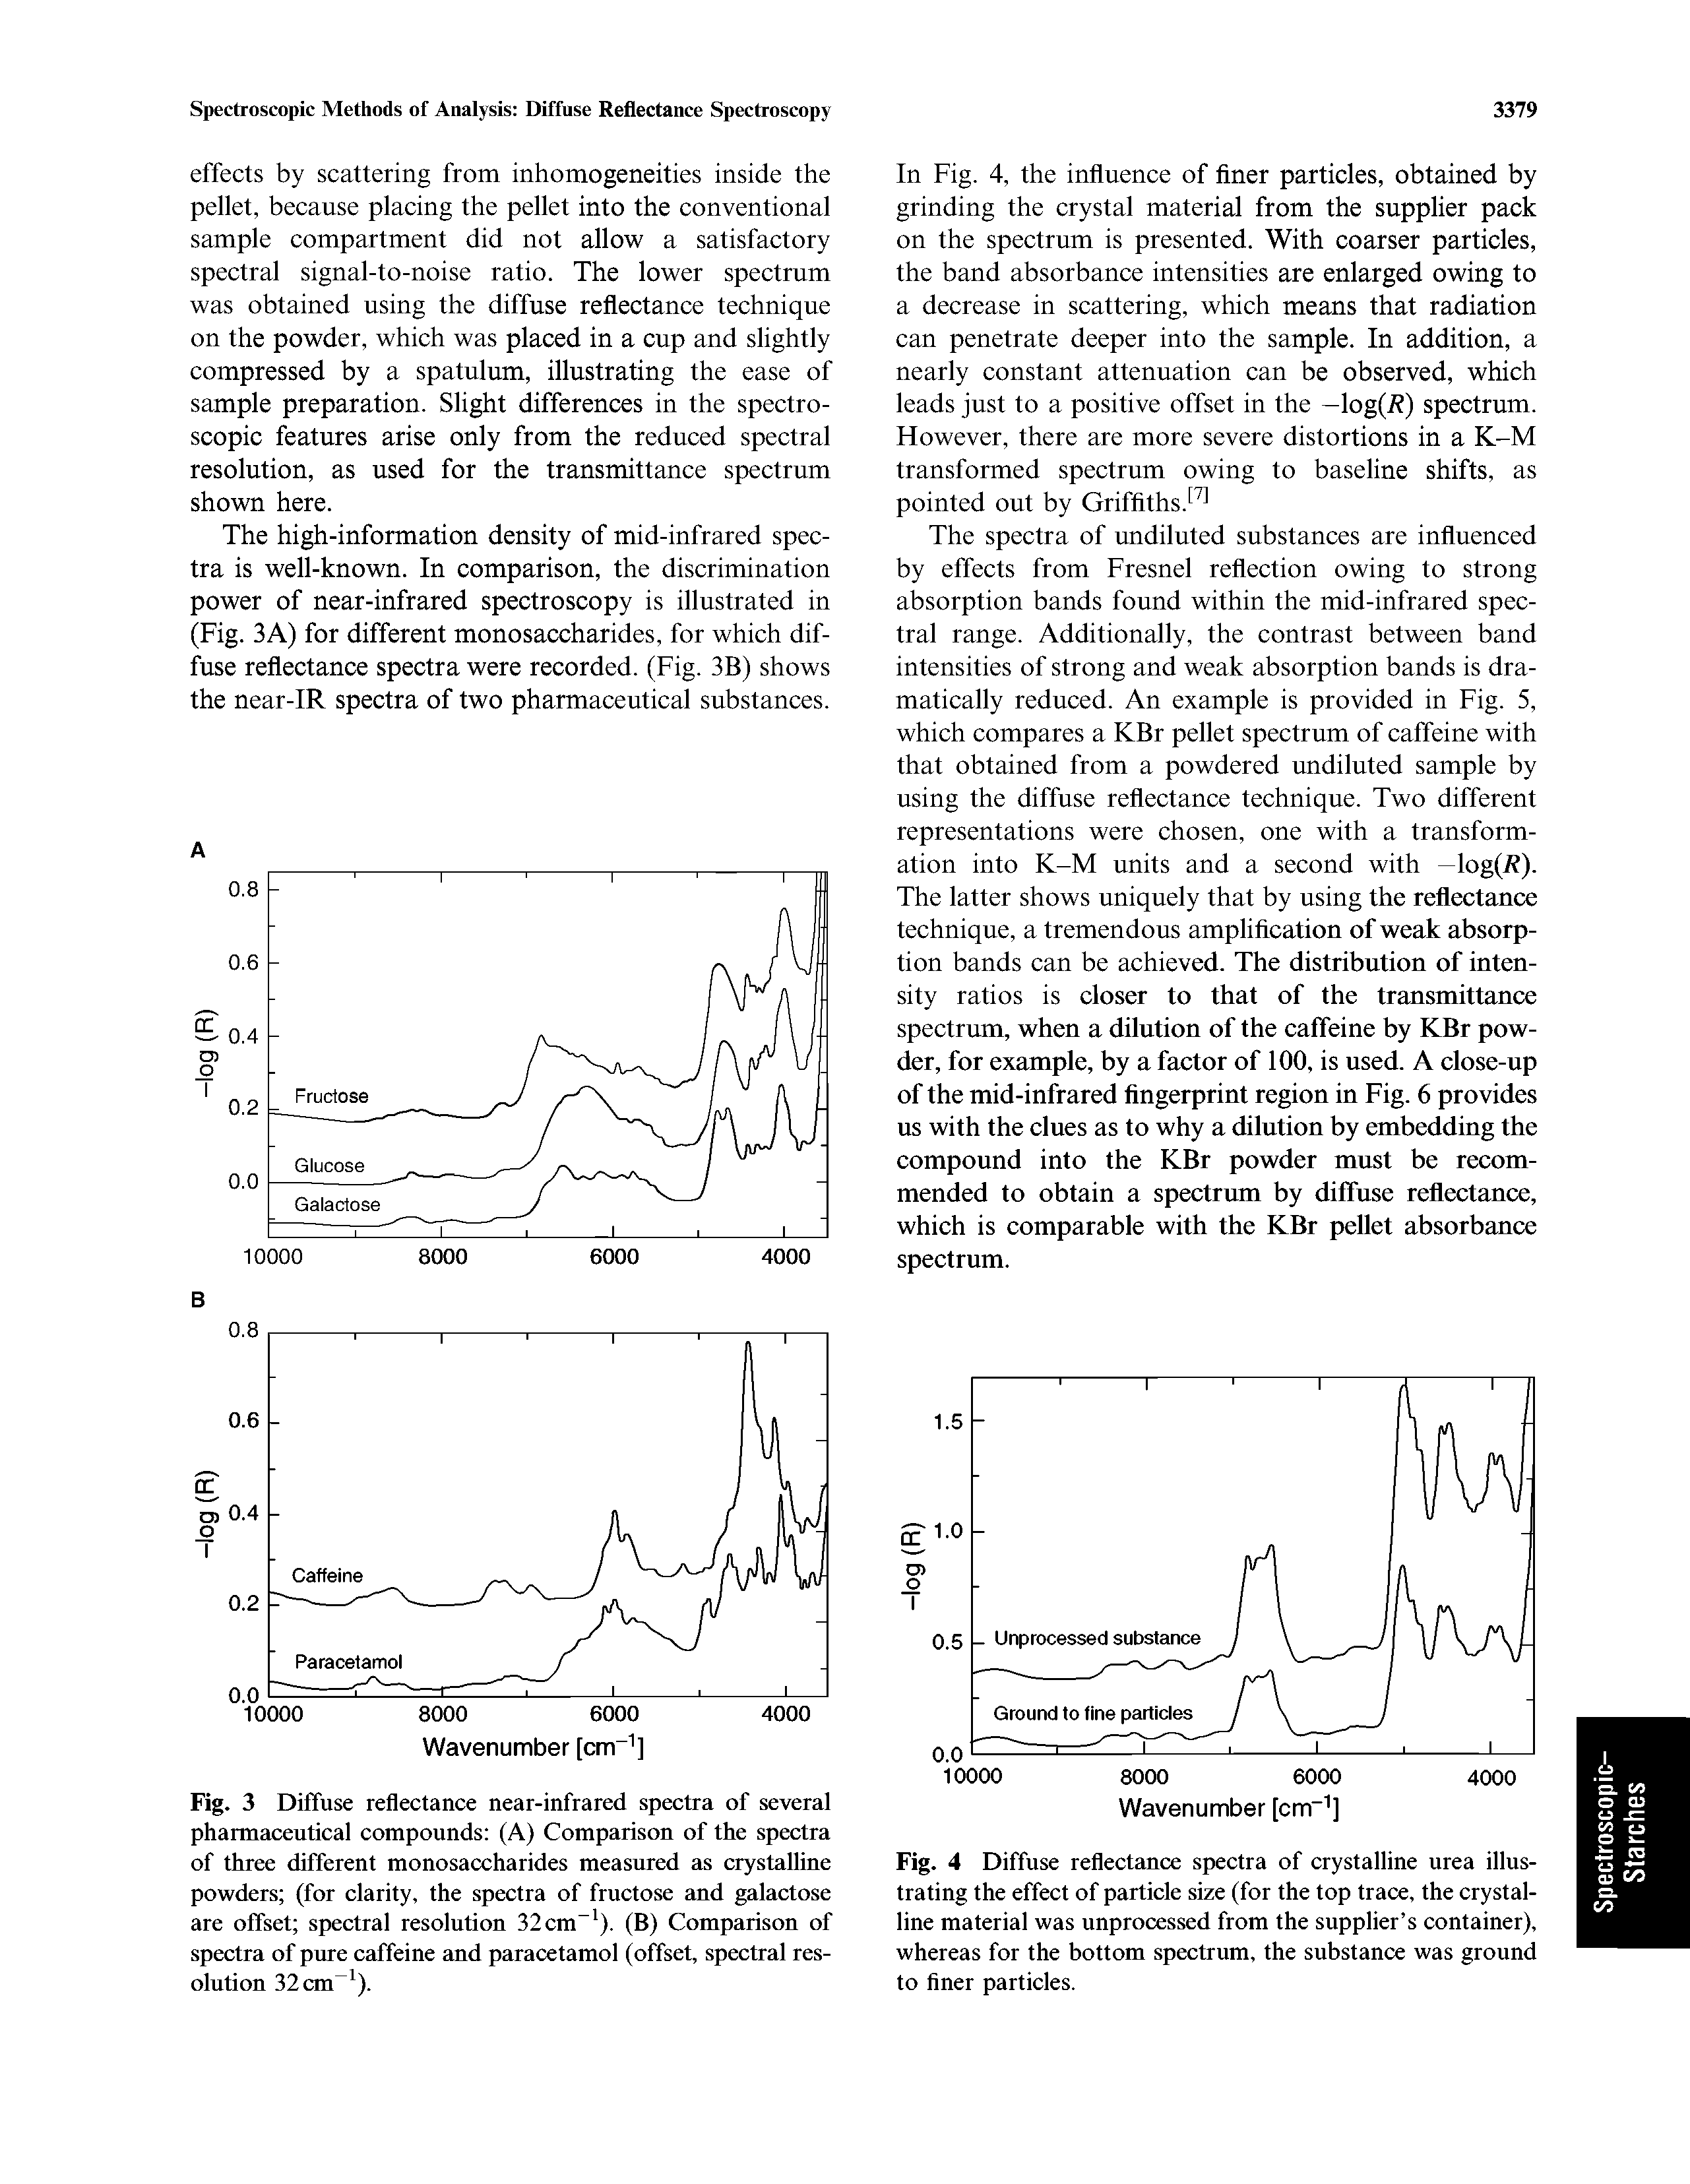 Fig. 4 Diffuse reflectance spectra of crystalline urea illustrating the effect of particle size (for the top trace, the crystalline material was unprocessed from the supplier s container), whereas for the bottom spectrum, the substance was ground to finer particles.